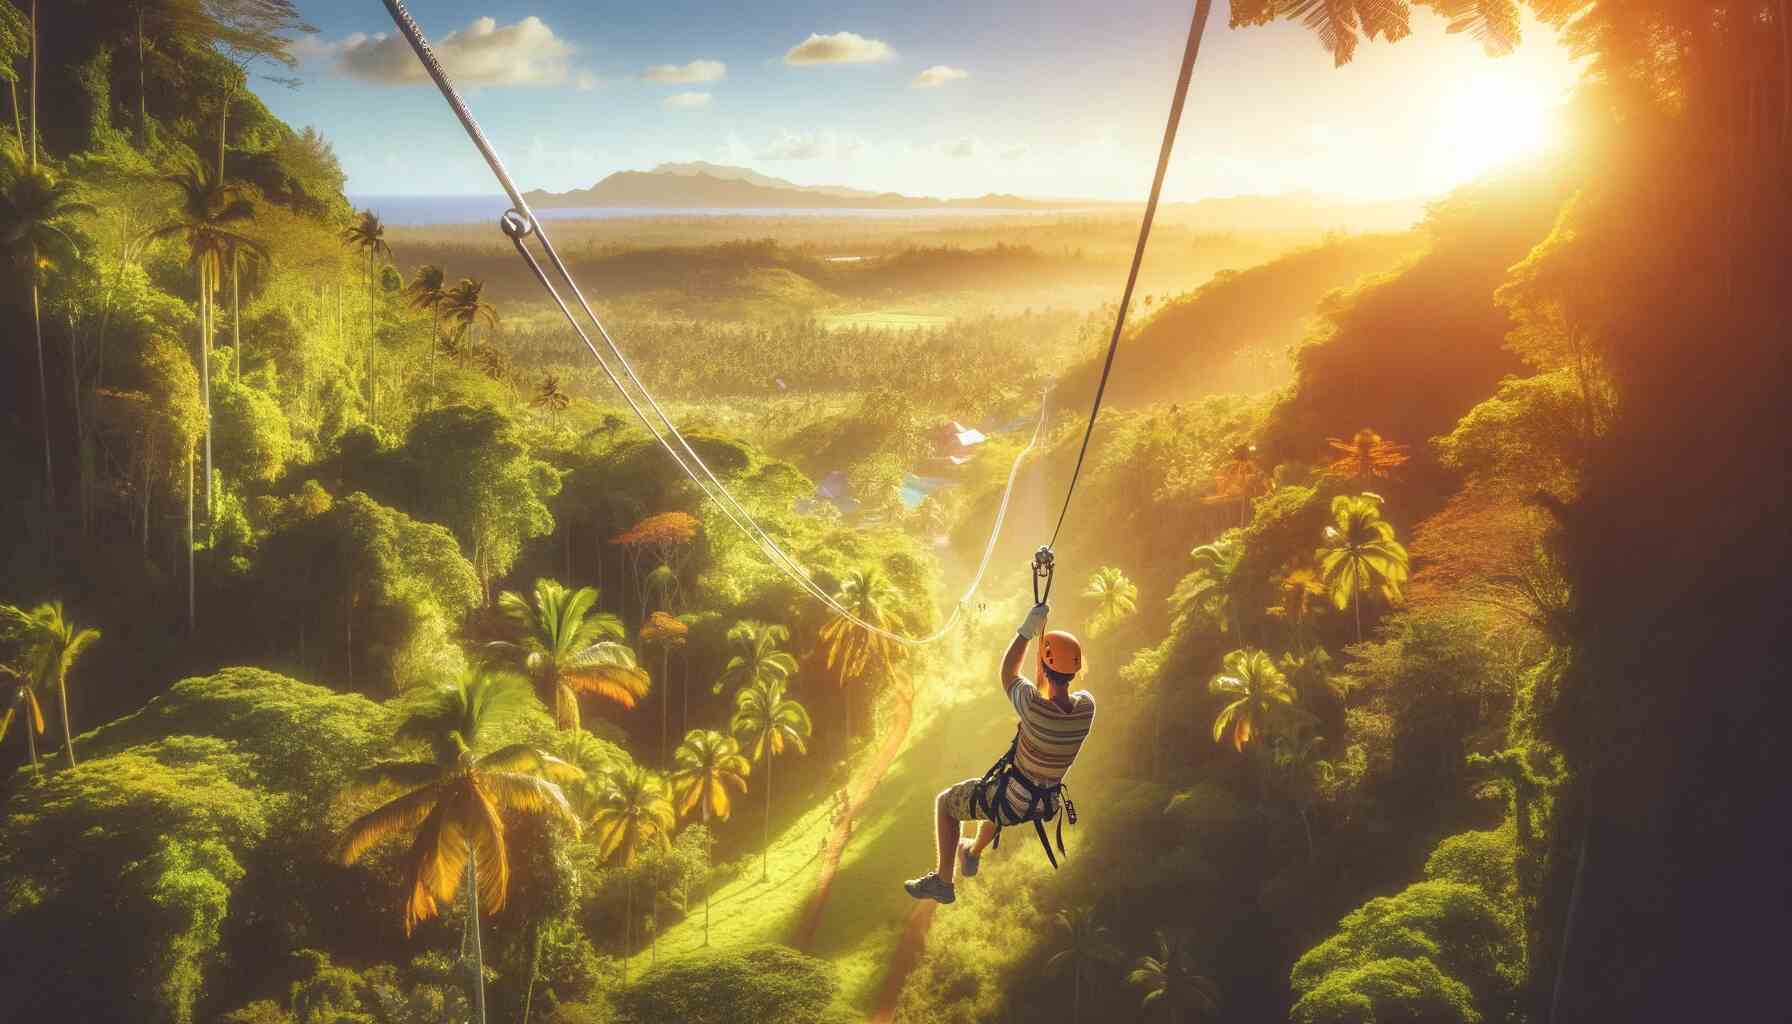 The author of this article ziplining over lush tropical forest in Punta Cana, with clear blue skies and distant mountains in the background, highlighting the excitement and beauty of the adventure.